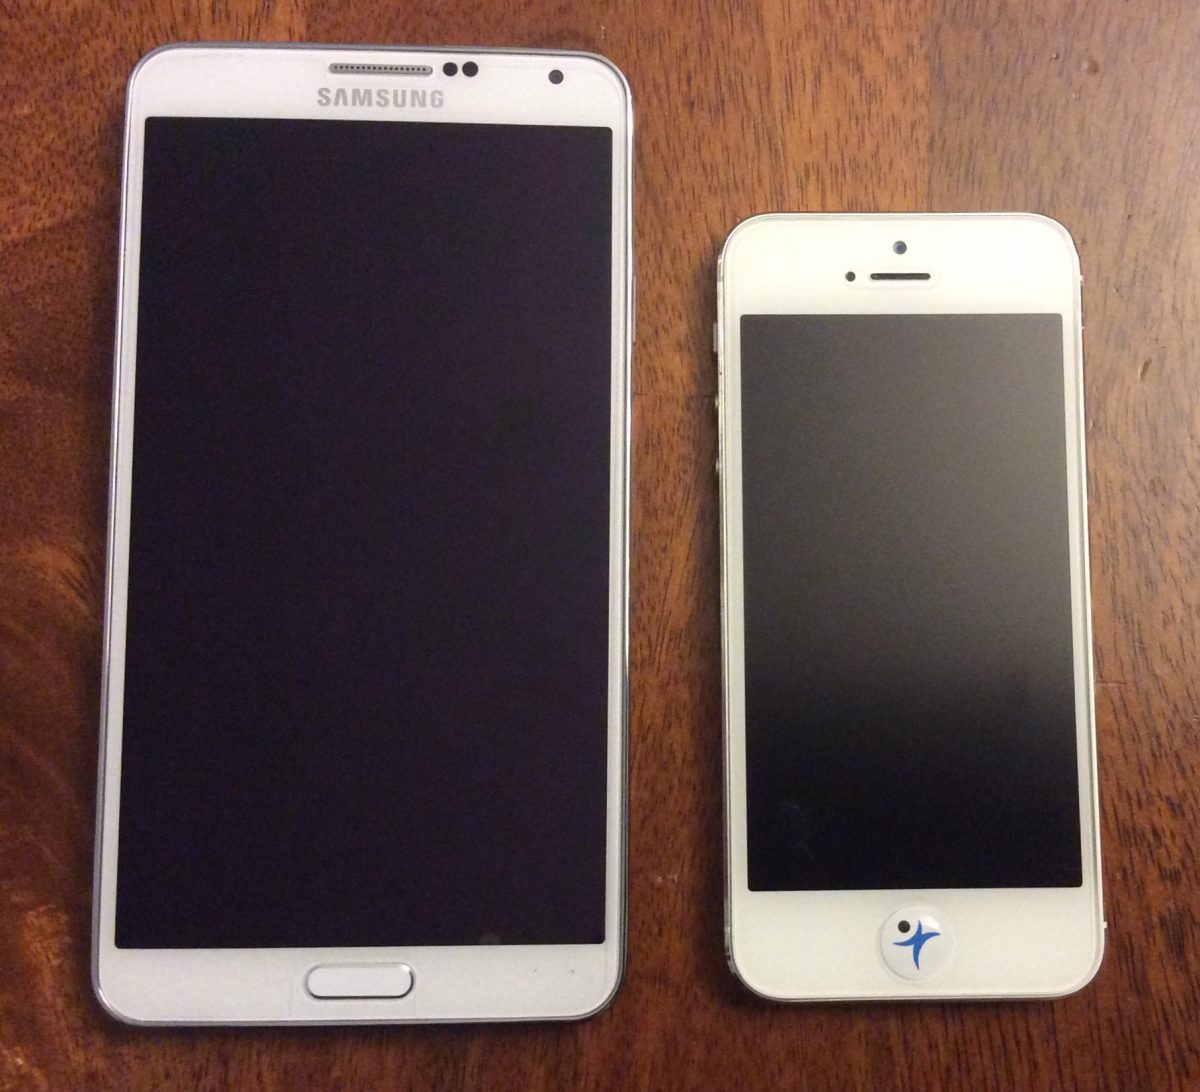 Top 10 Reasons I Switched from the 5.7" Galaxy Note 3 back to the iPhone 5